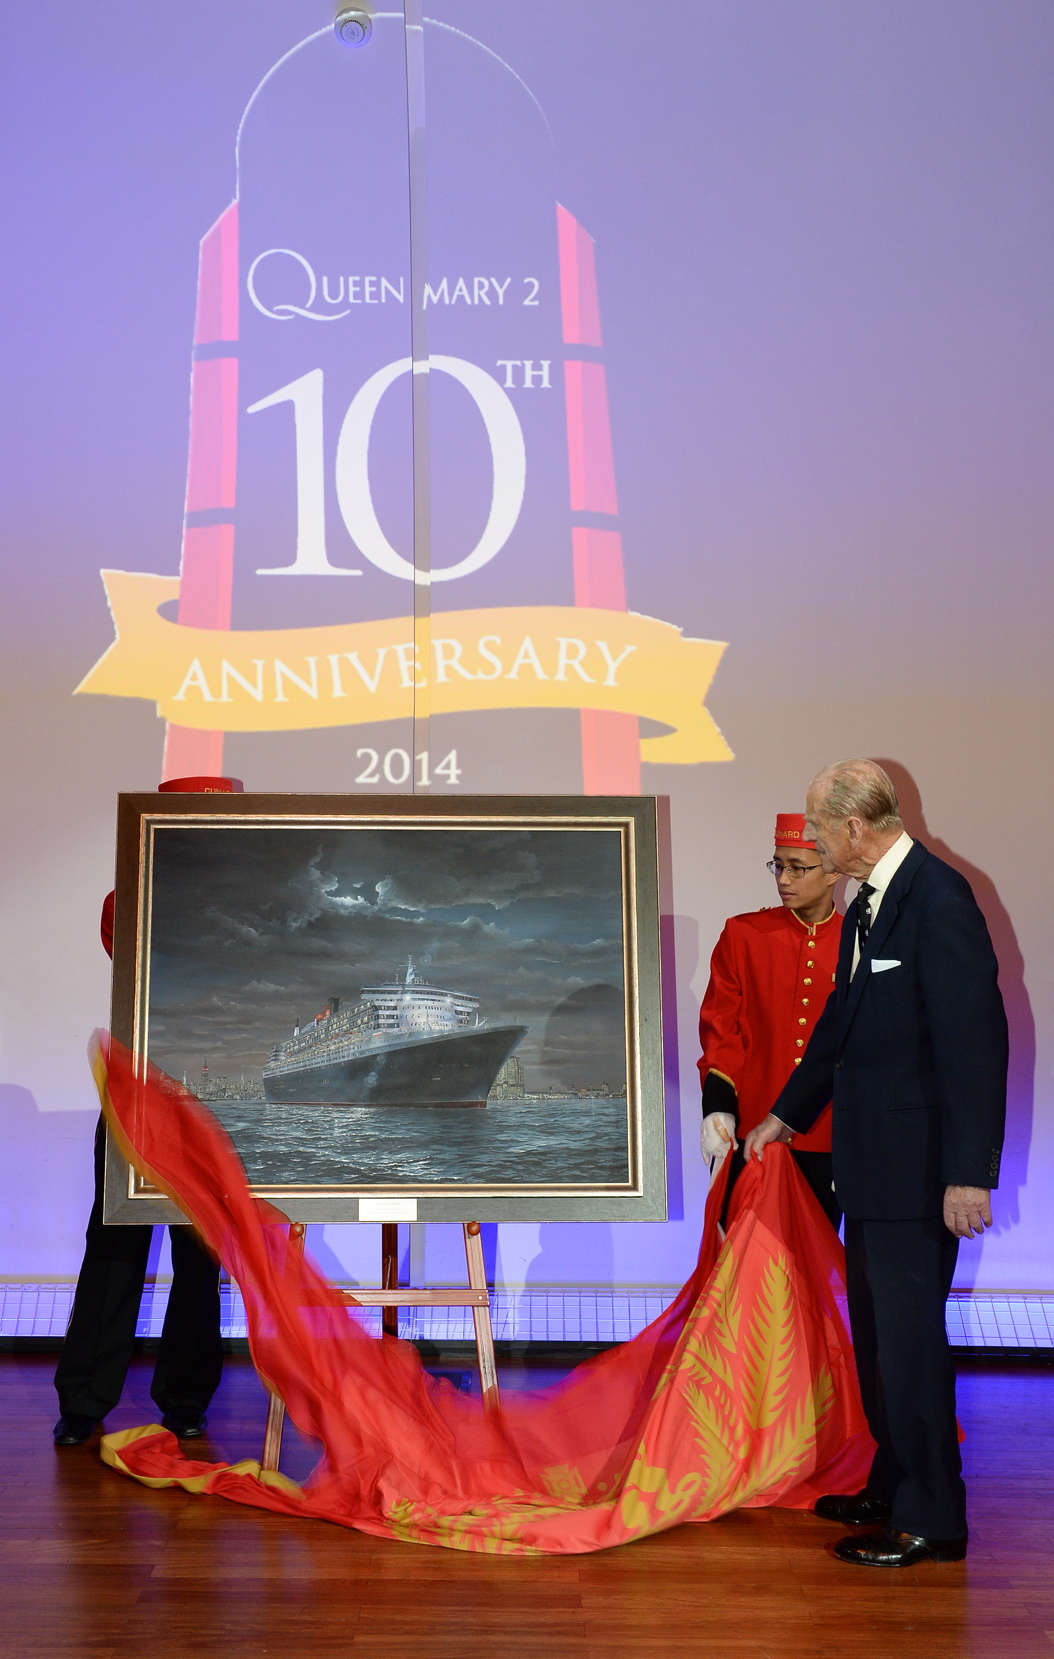 The Duke of Edinburgh Unveils a Painting of Queen Mary 2